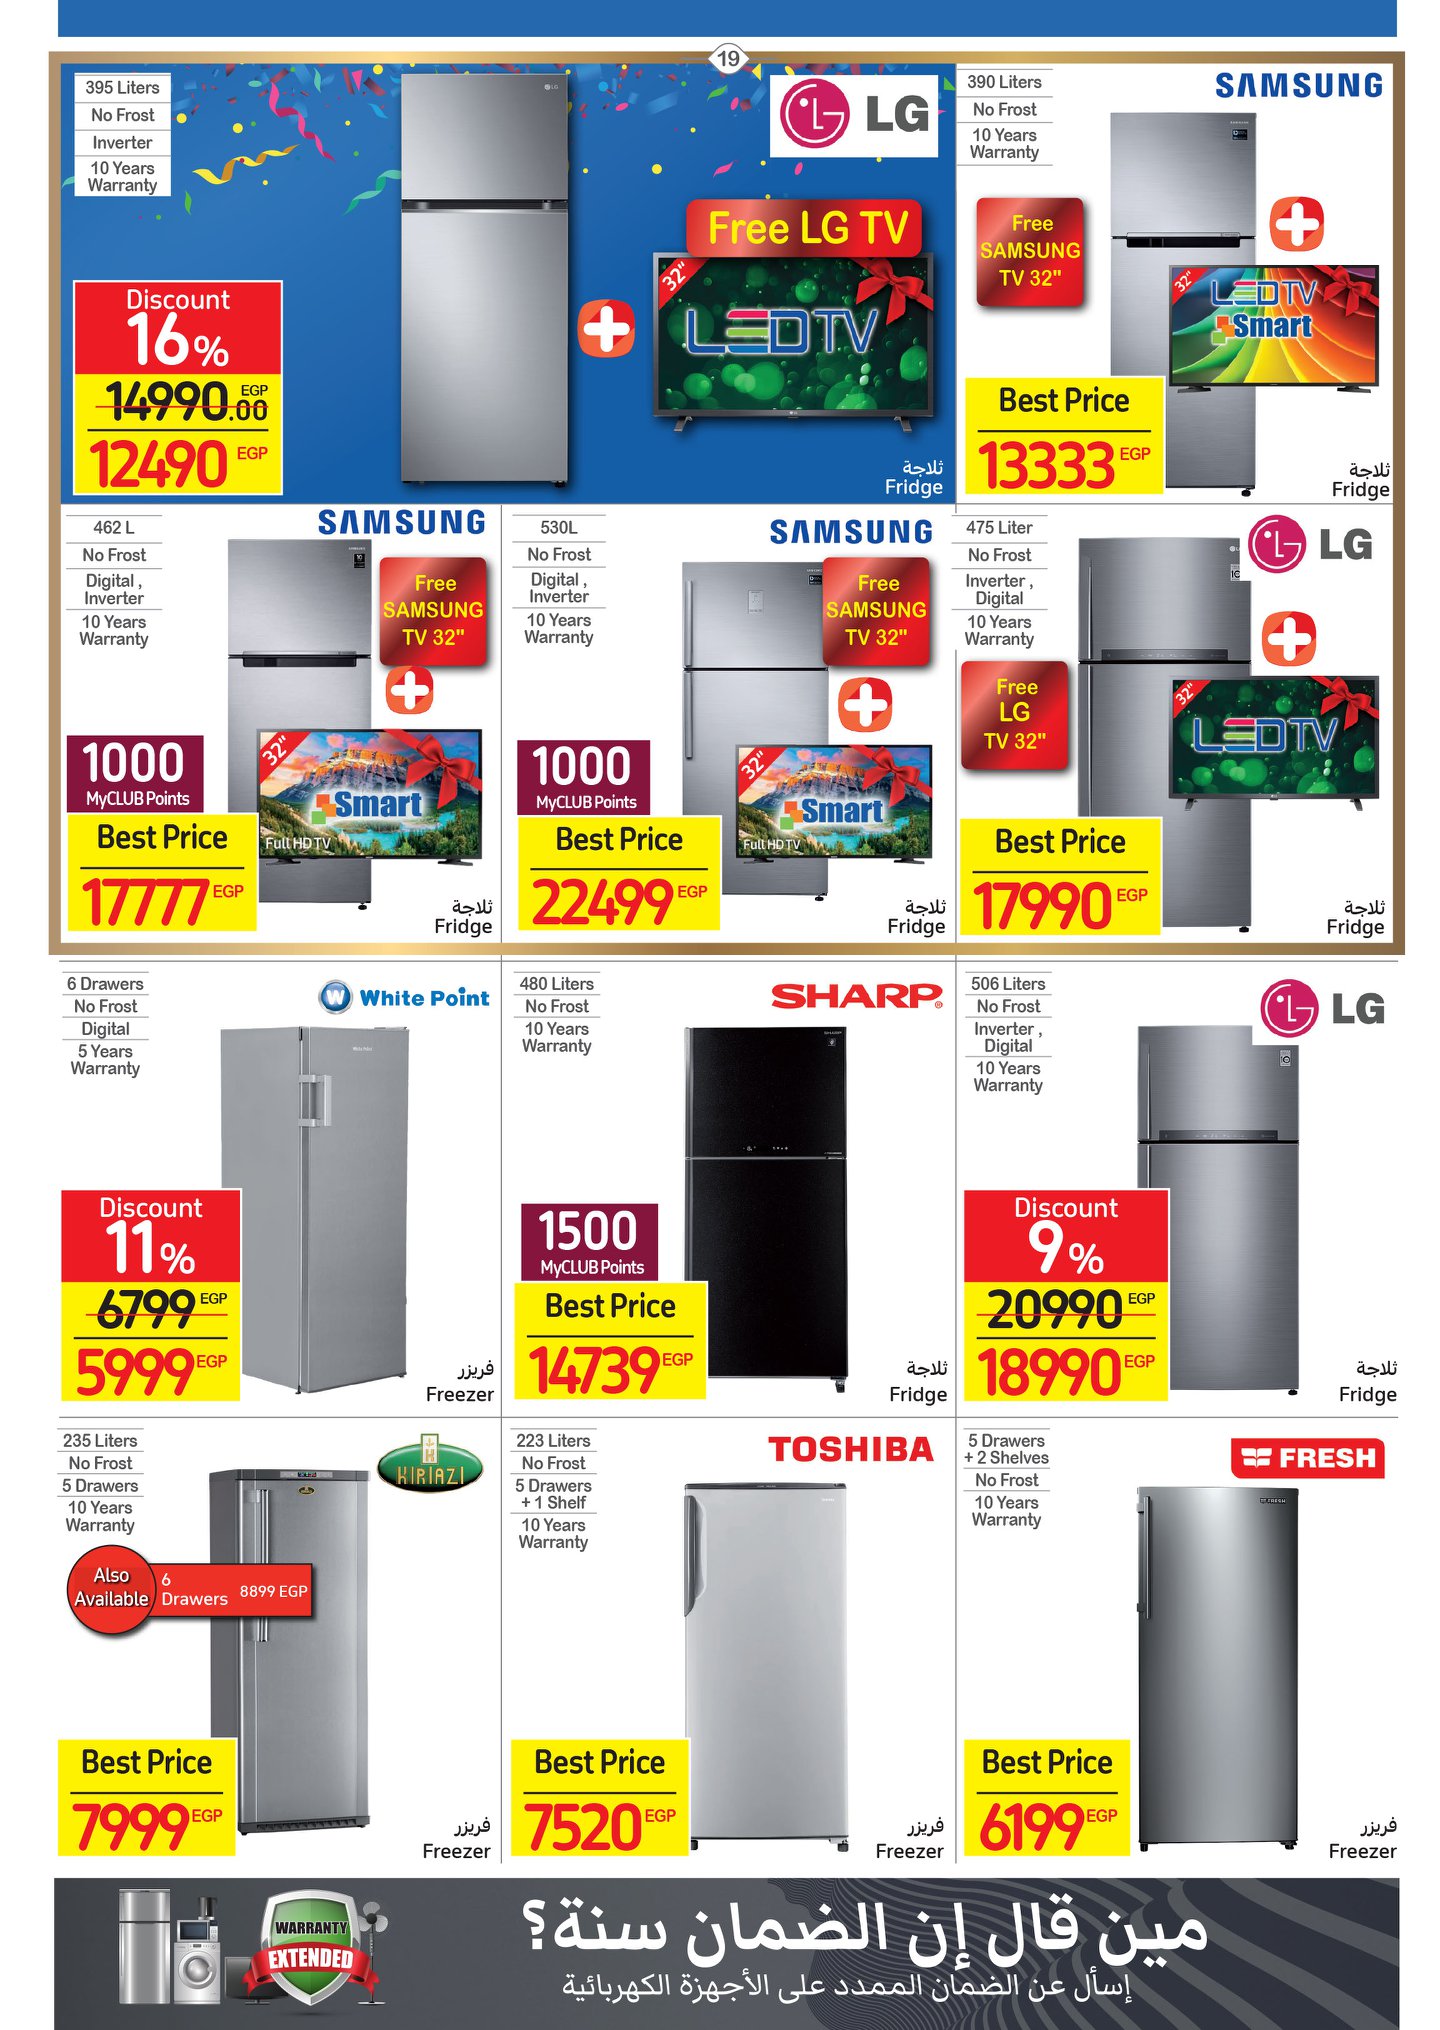 Carrefour magazine offers full 50% discounts and a surprise purchase in convenient installments without interest 23